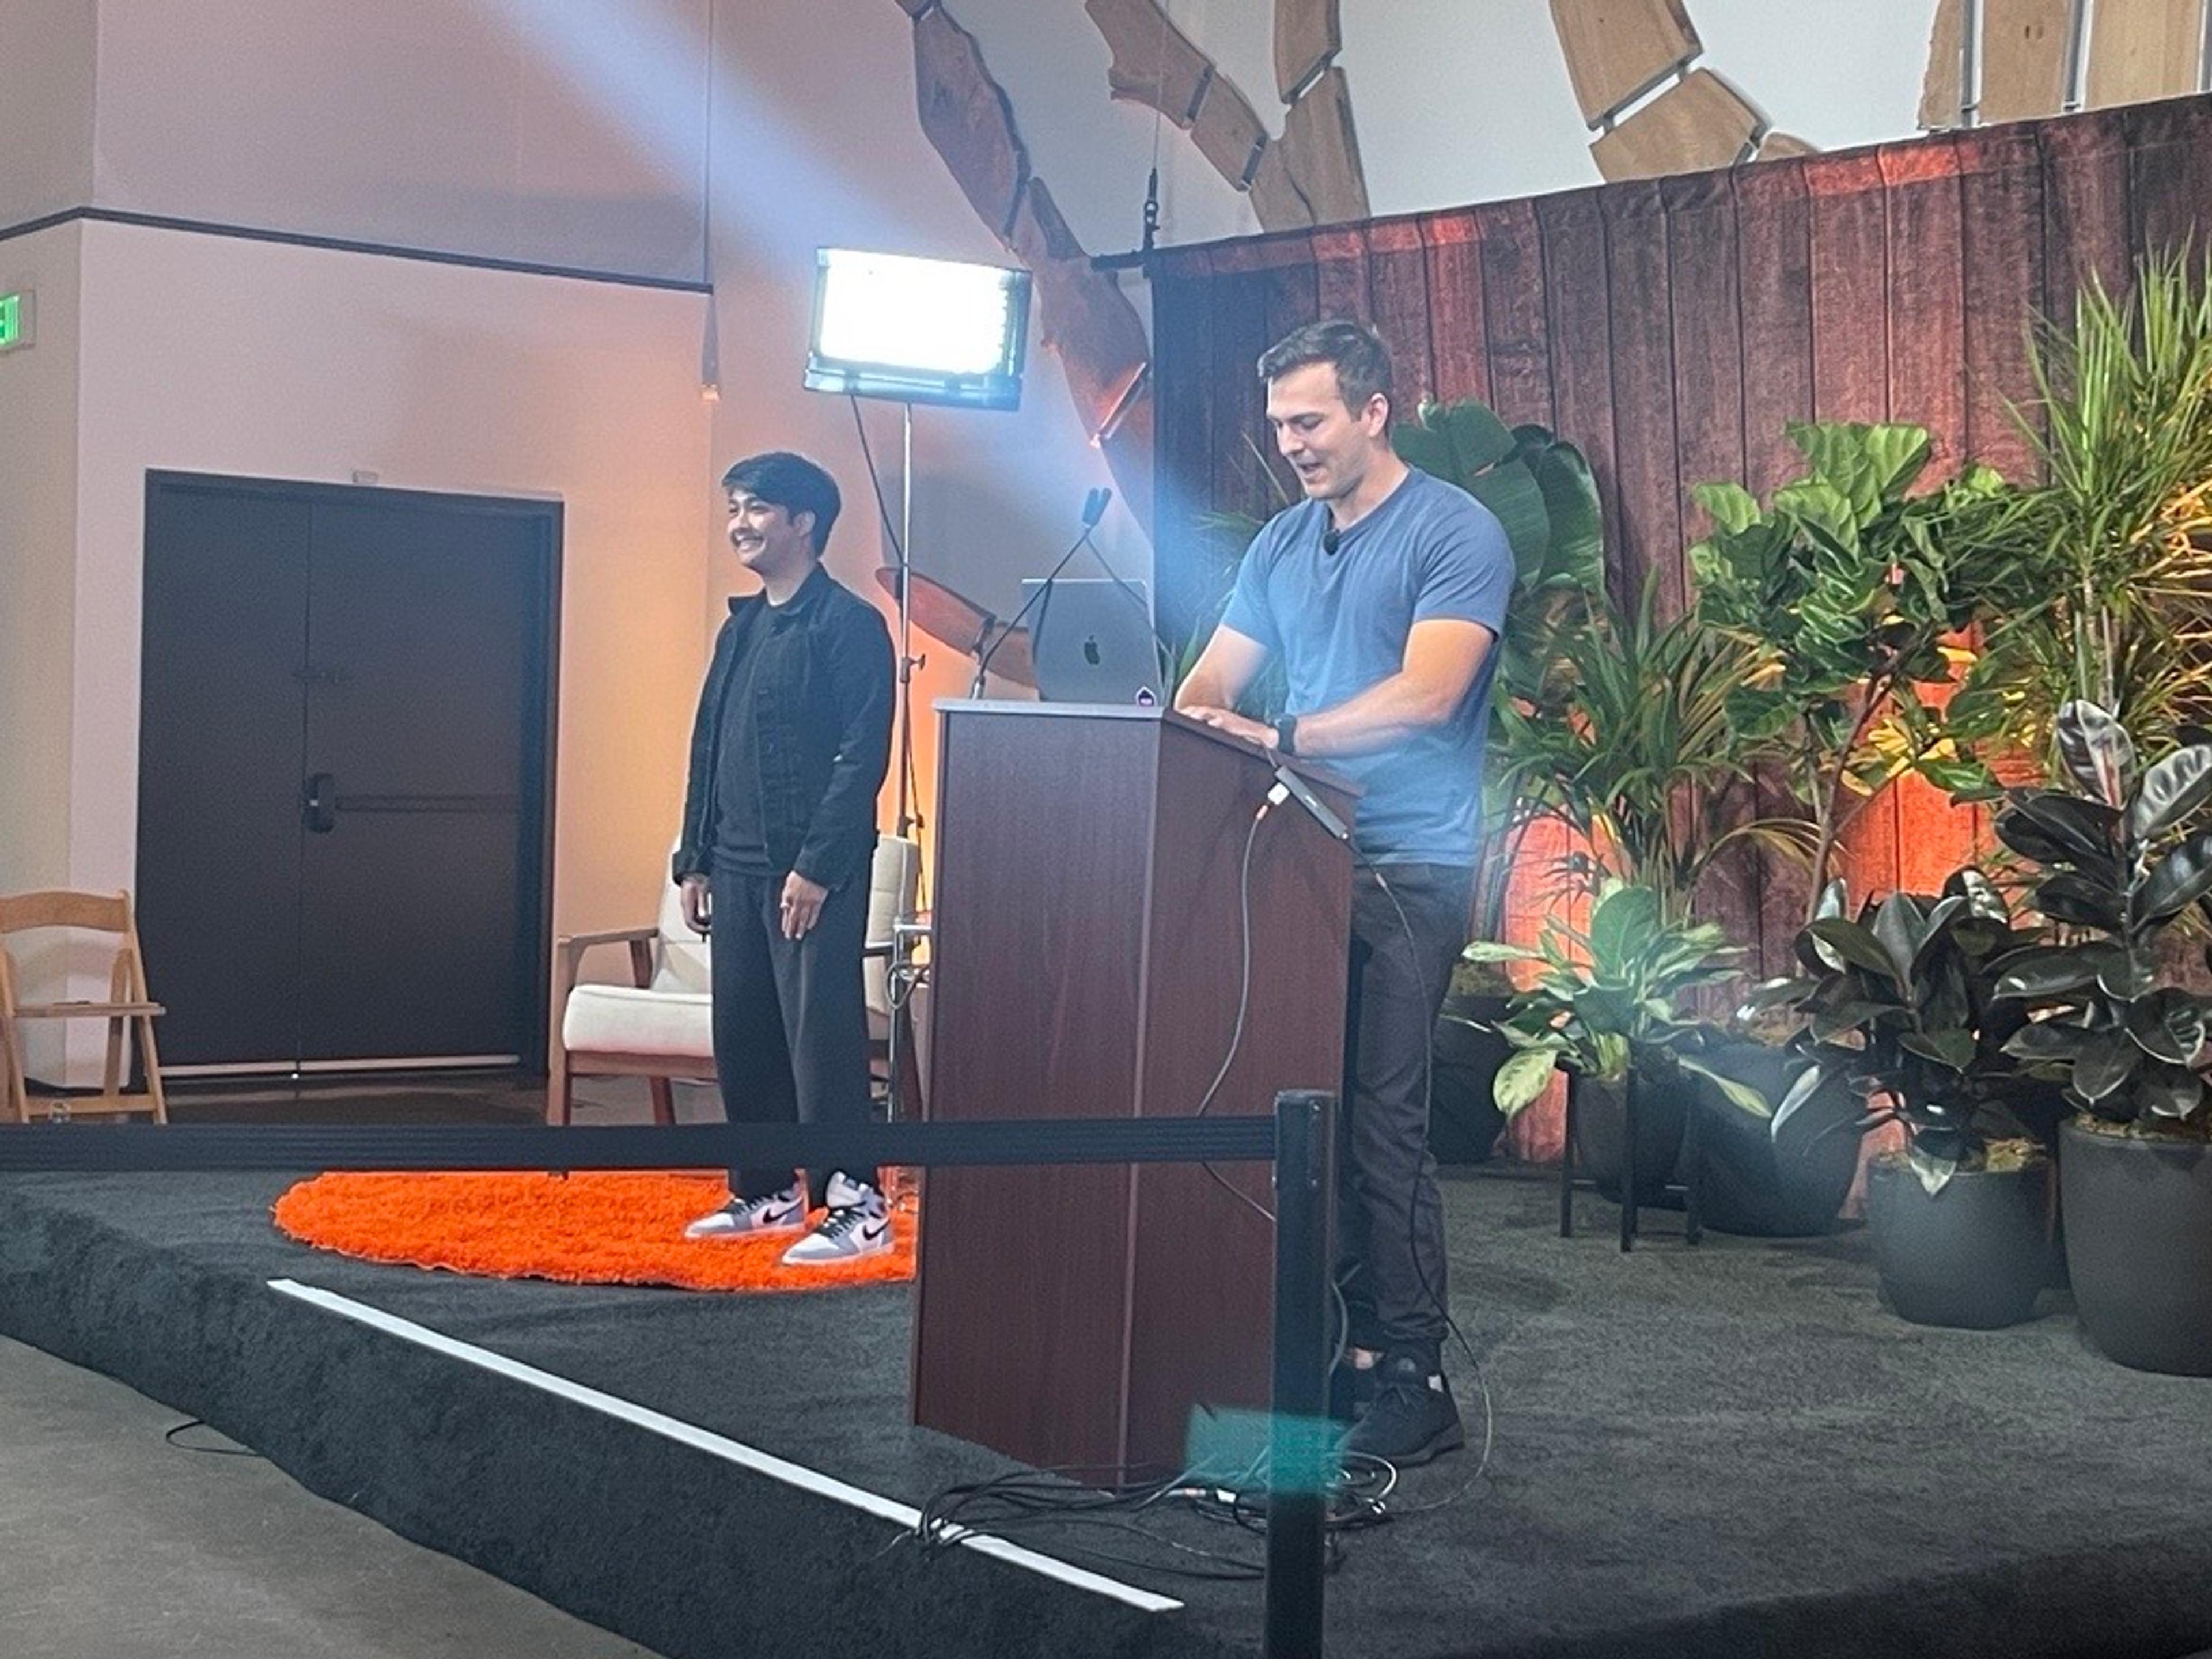 A picture of two people presenting on stage from the front-row. A man wearing all black and sneakers standing on a fuzzy orange rug and a man wearing a blue shirt and black jeans standing behind a podium.